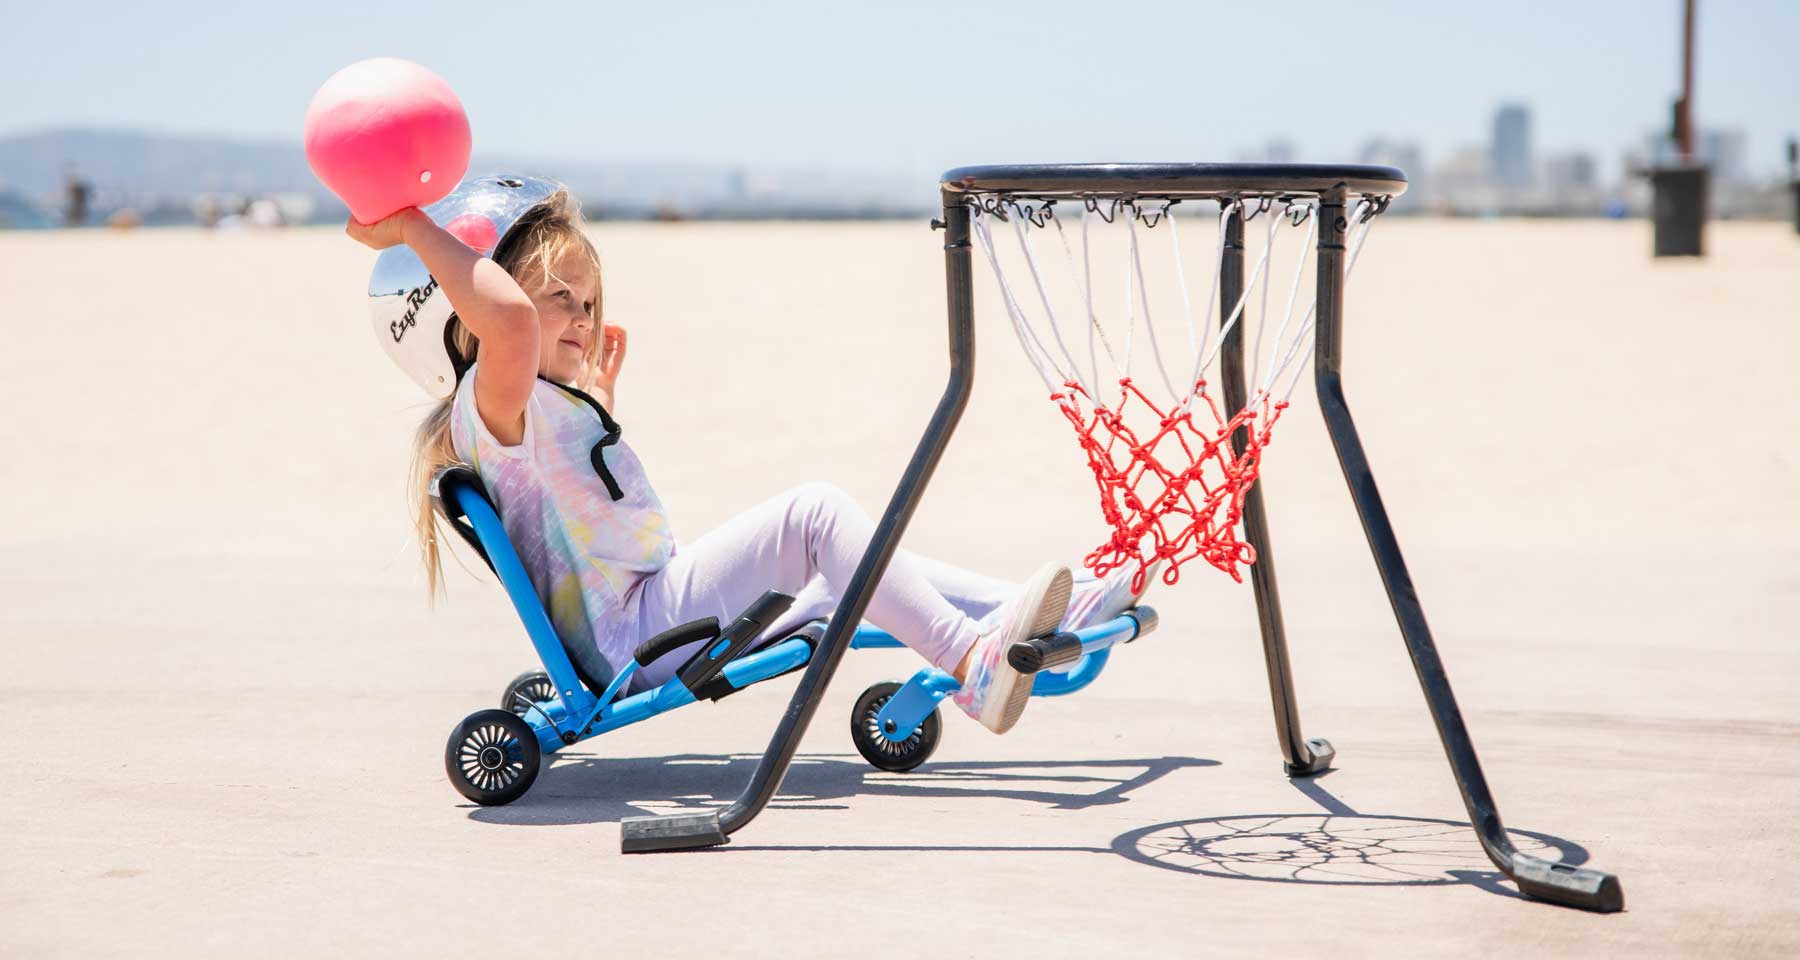 EzyRoller: for Ride-On Active Fun for Kids & Adults! - US Japan Fam